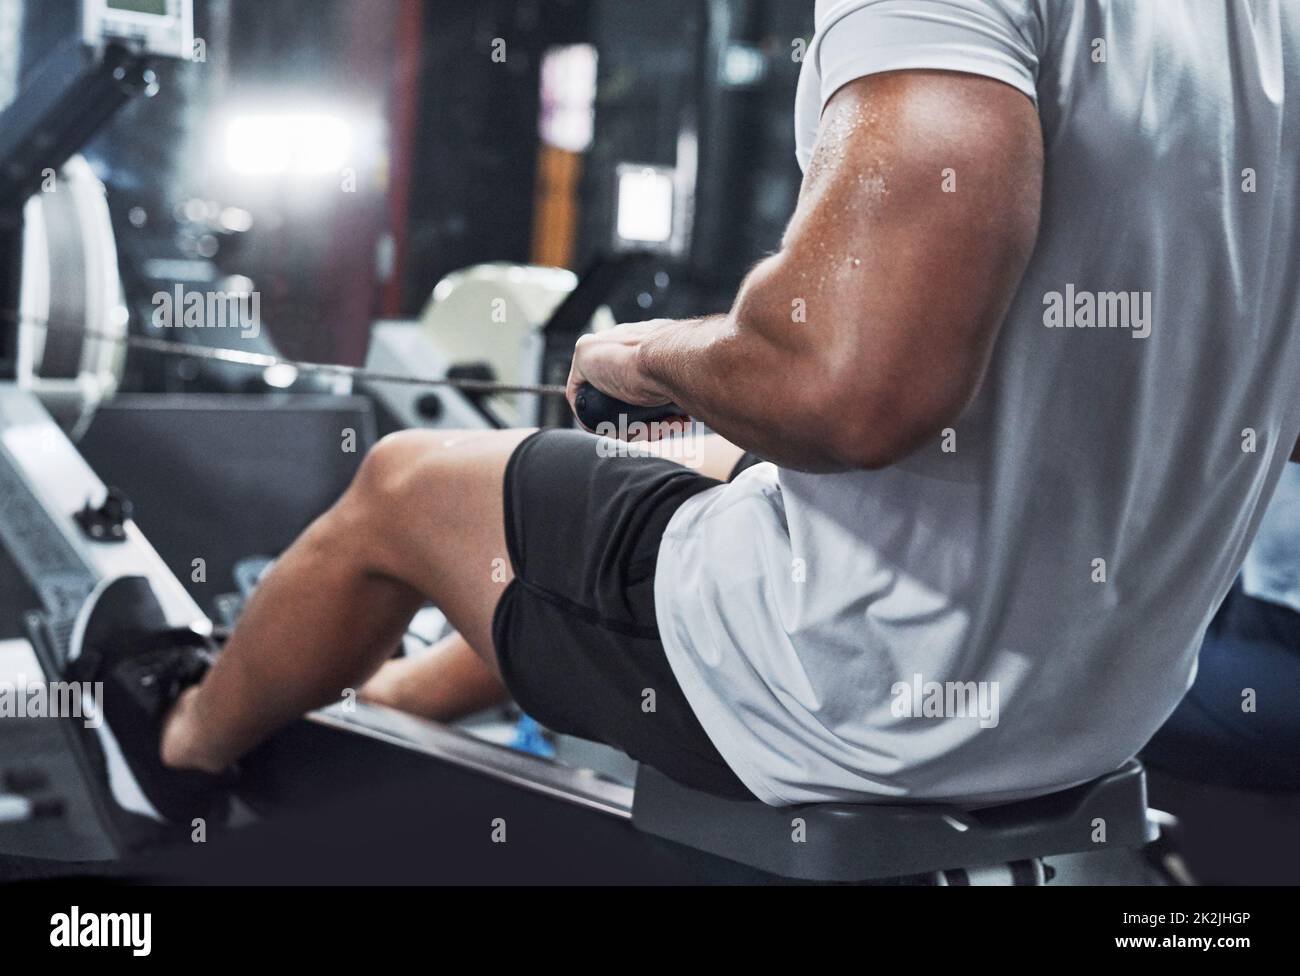 Working his entire body. Cropped shot of an unrecognizable male athlete working out on a rowing machine in the gym. Stock Photo